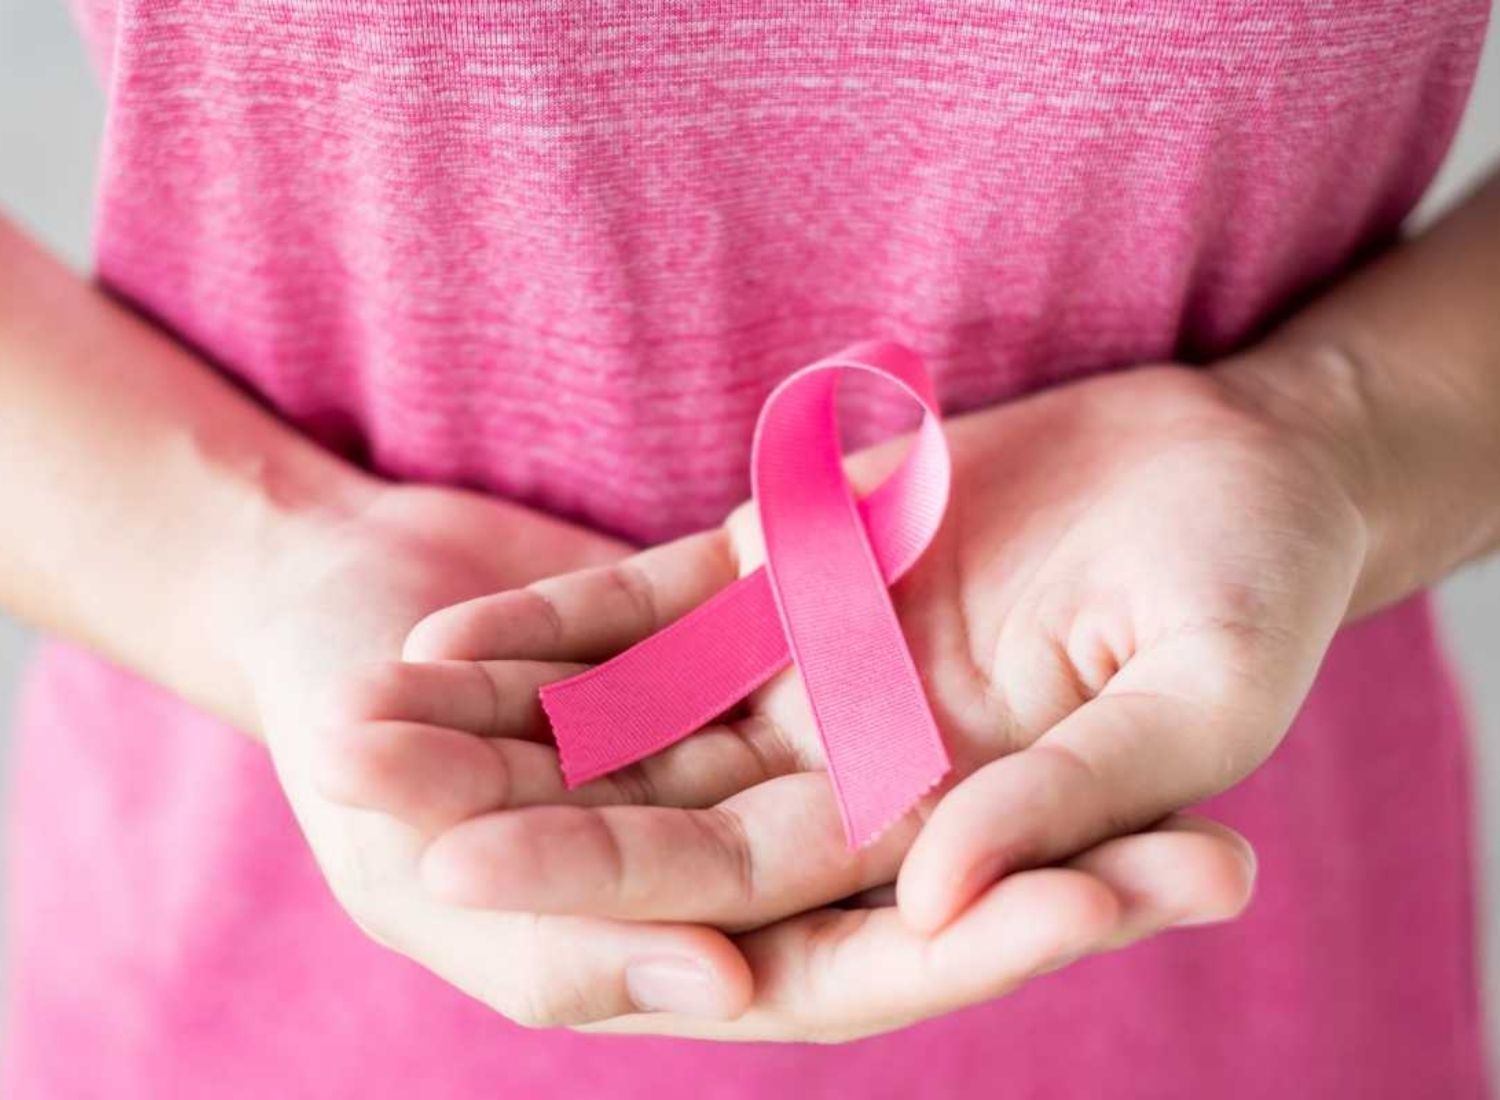 11 Essential Tips To Prevent The Risk Of Breast Cancer